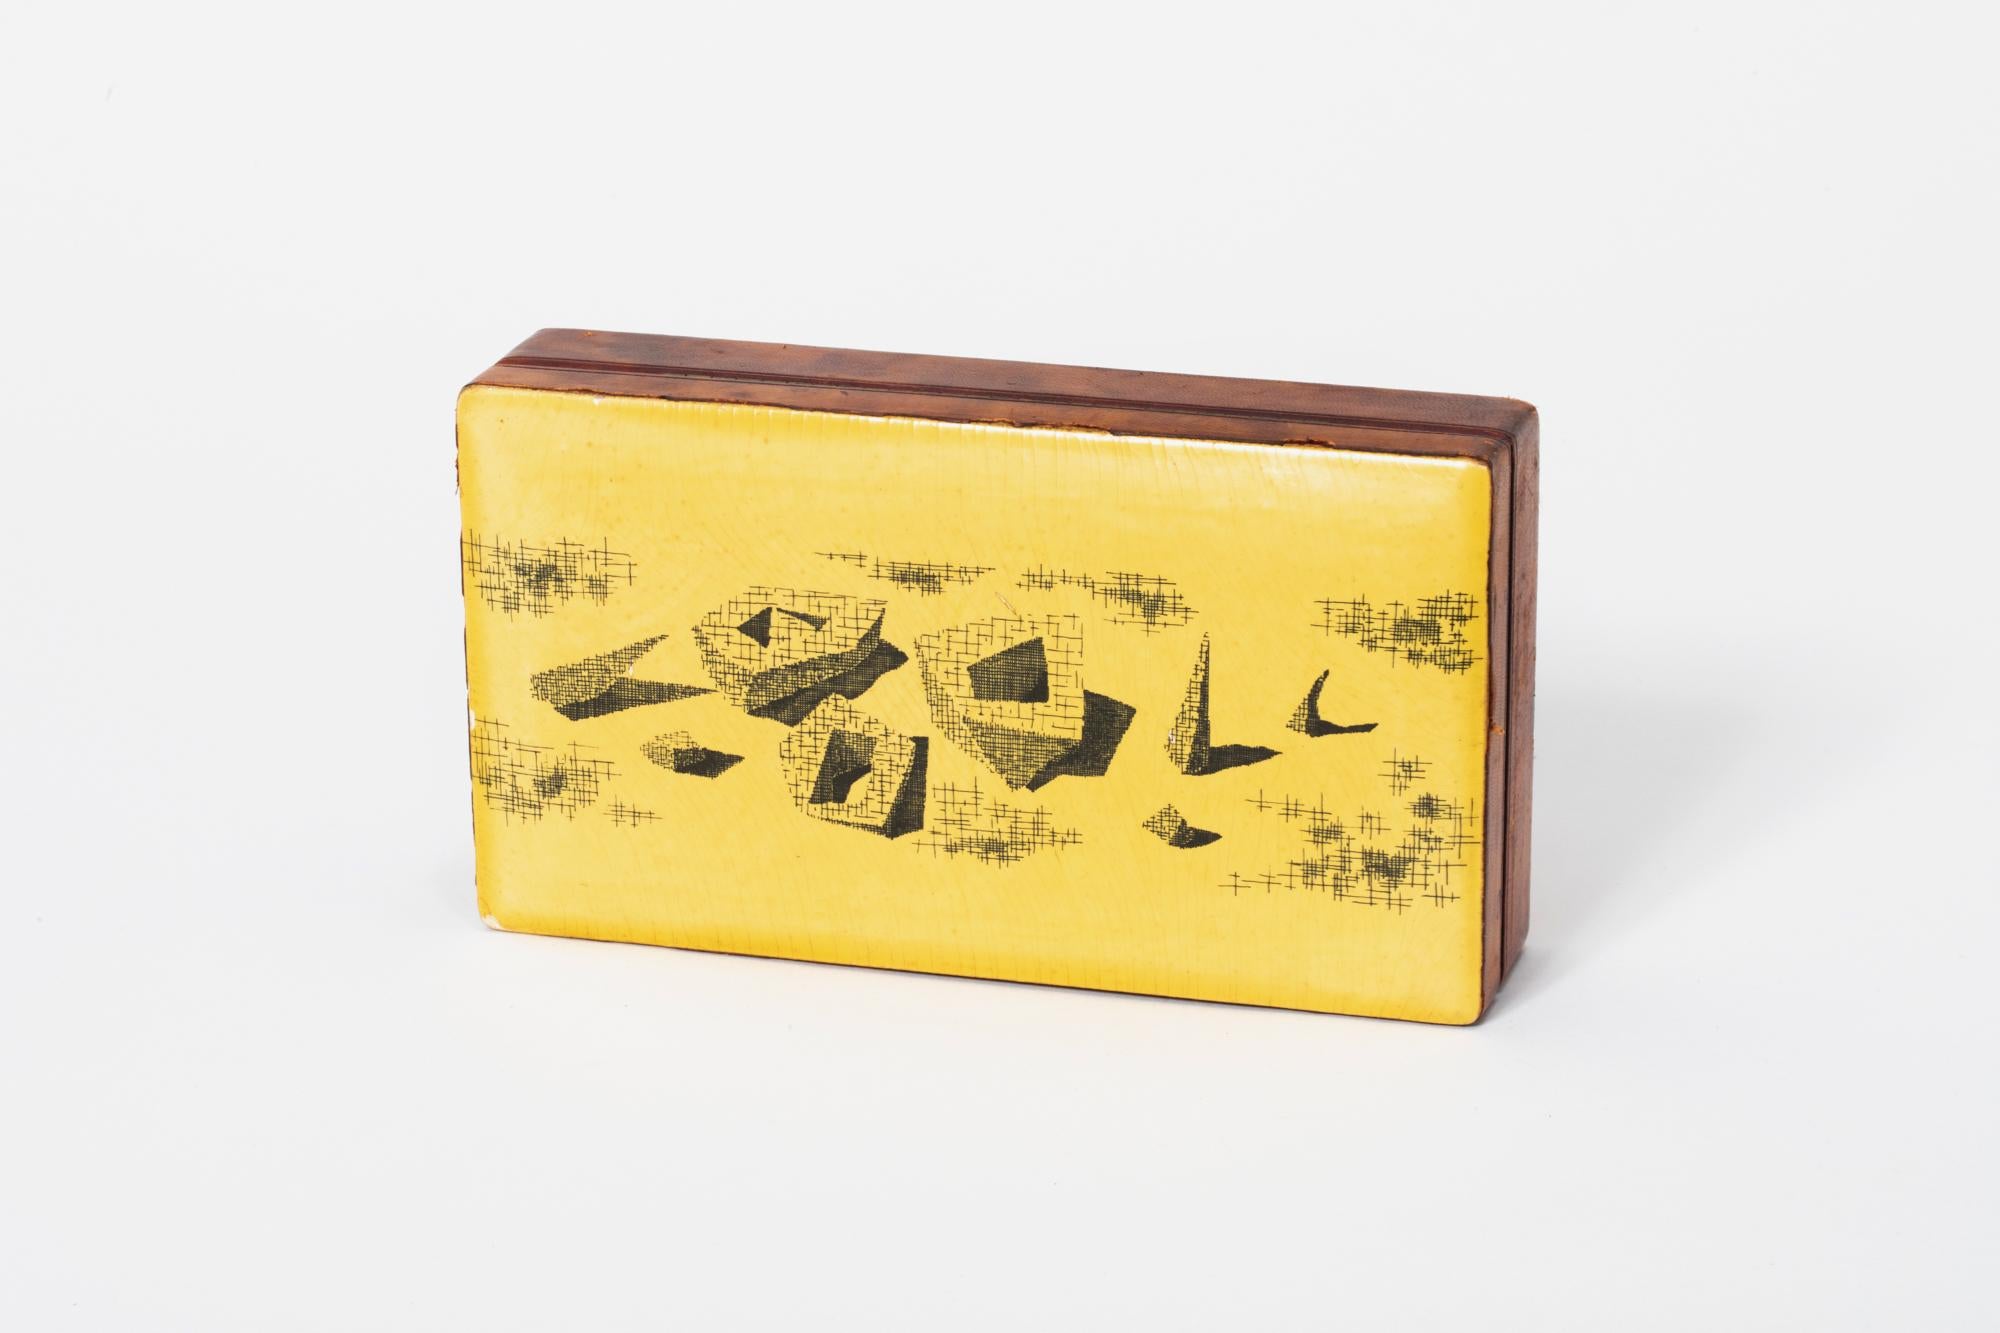 Modernist Italian lacquer, leather, mahogany and silk hinged box with a hand-painted modernist abstract decoration.